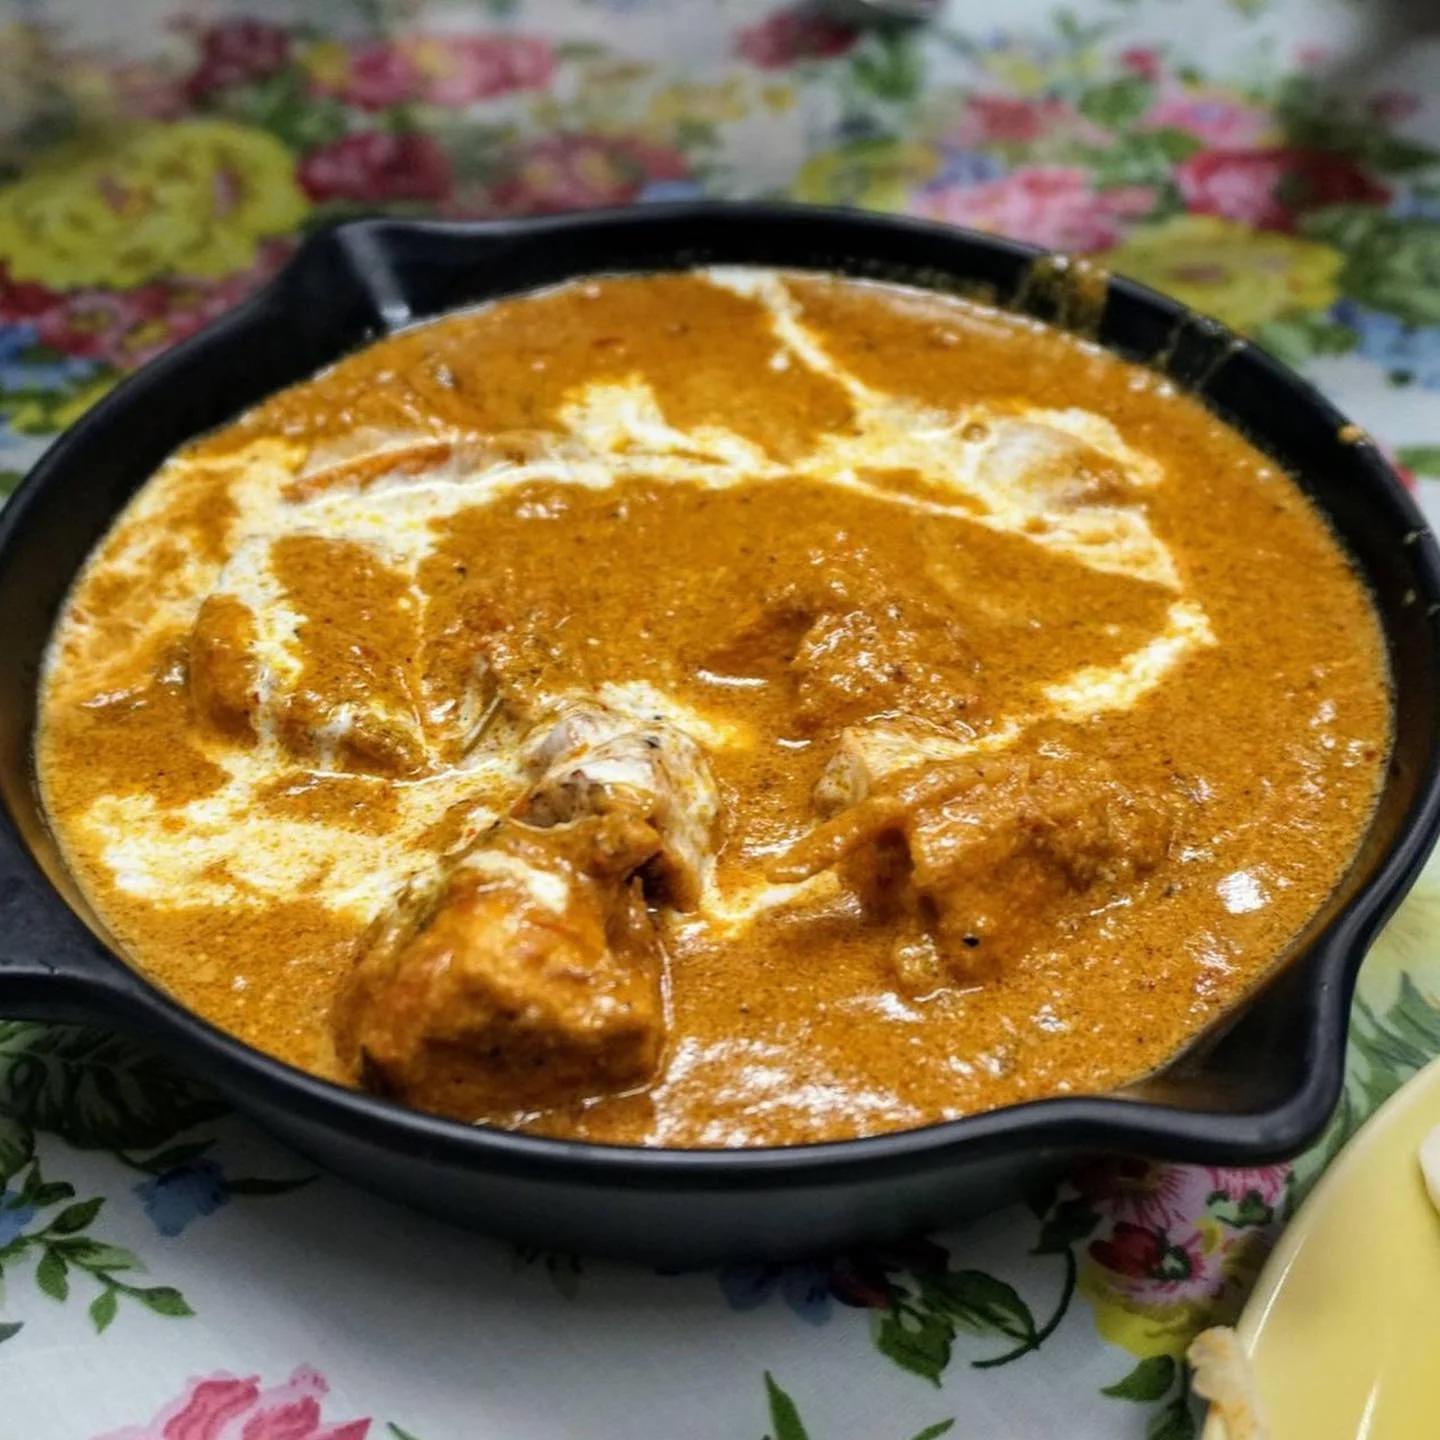 Curry for naan bread